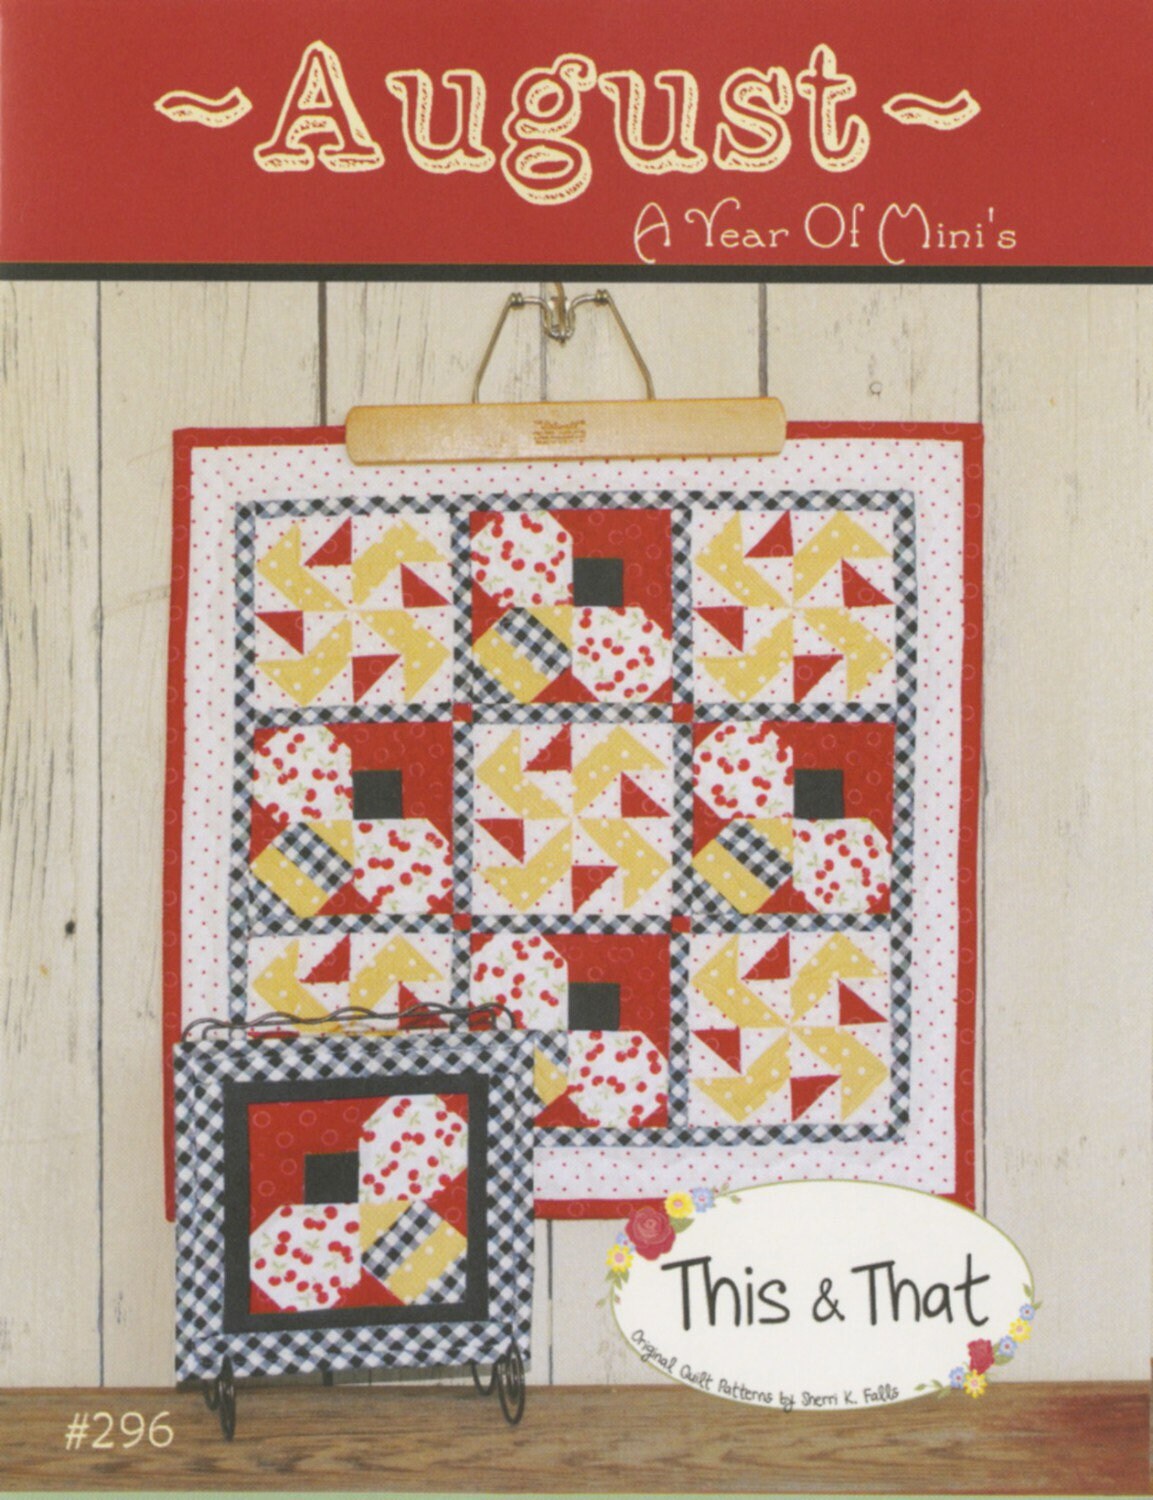 A Year of Minis - August Mini Quilt Pattern - This & That - Sherri Falls